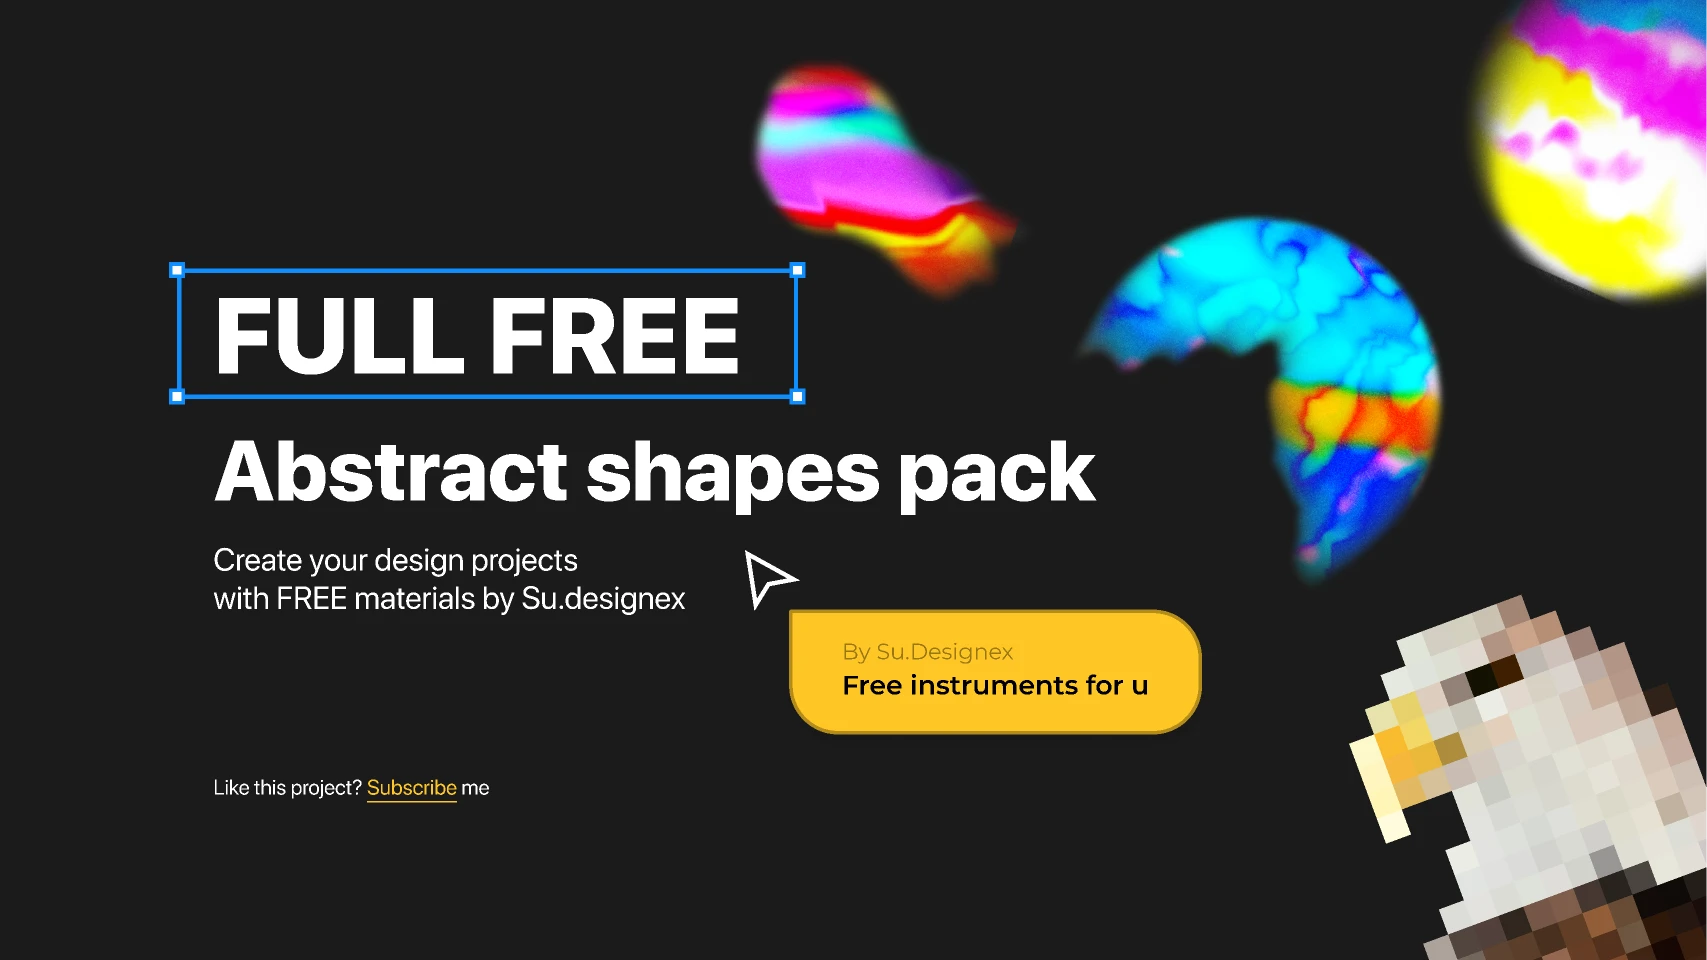 Free abstract shapes pack for Figma and Adobe XD